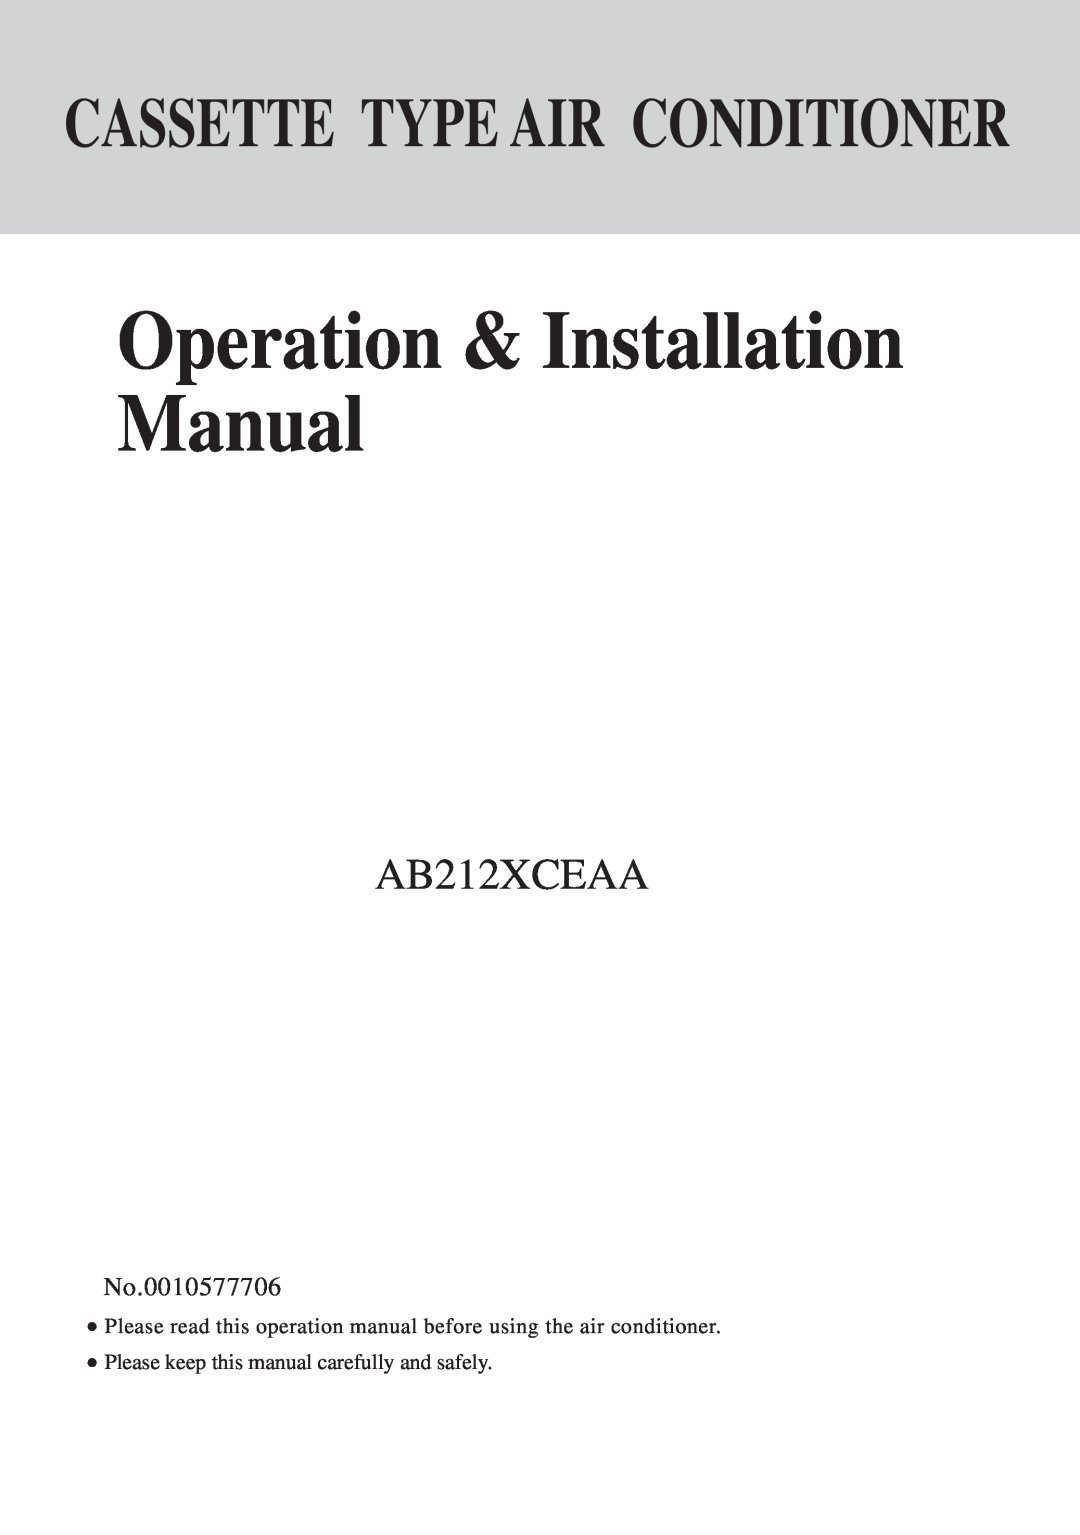 Haier AB212XCEAA operation manual No.0010577706, Operation & Installation Manual, Cassette Type Air Conditioner 